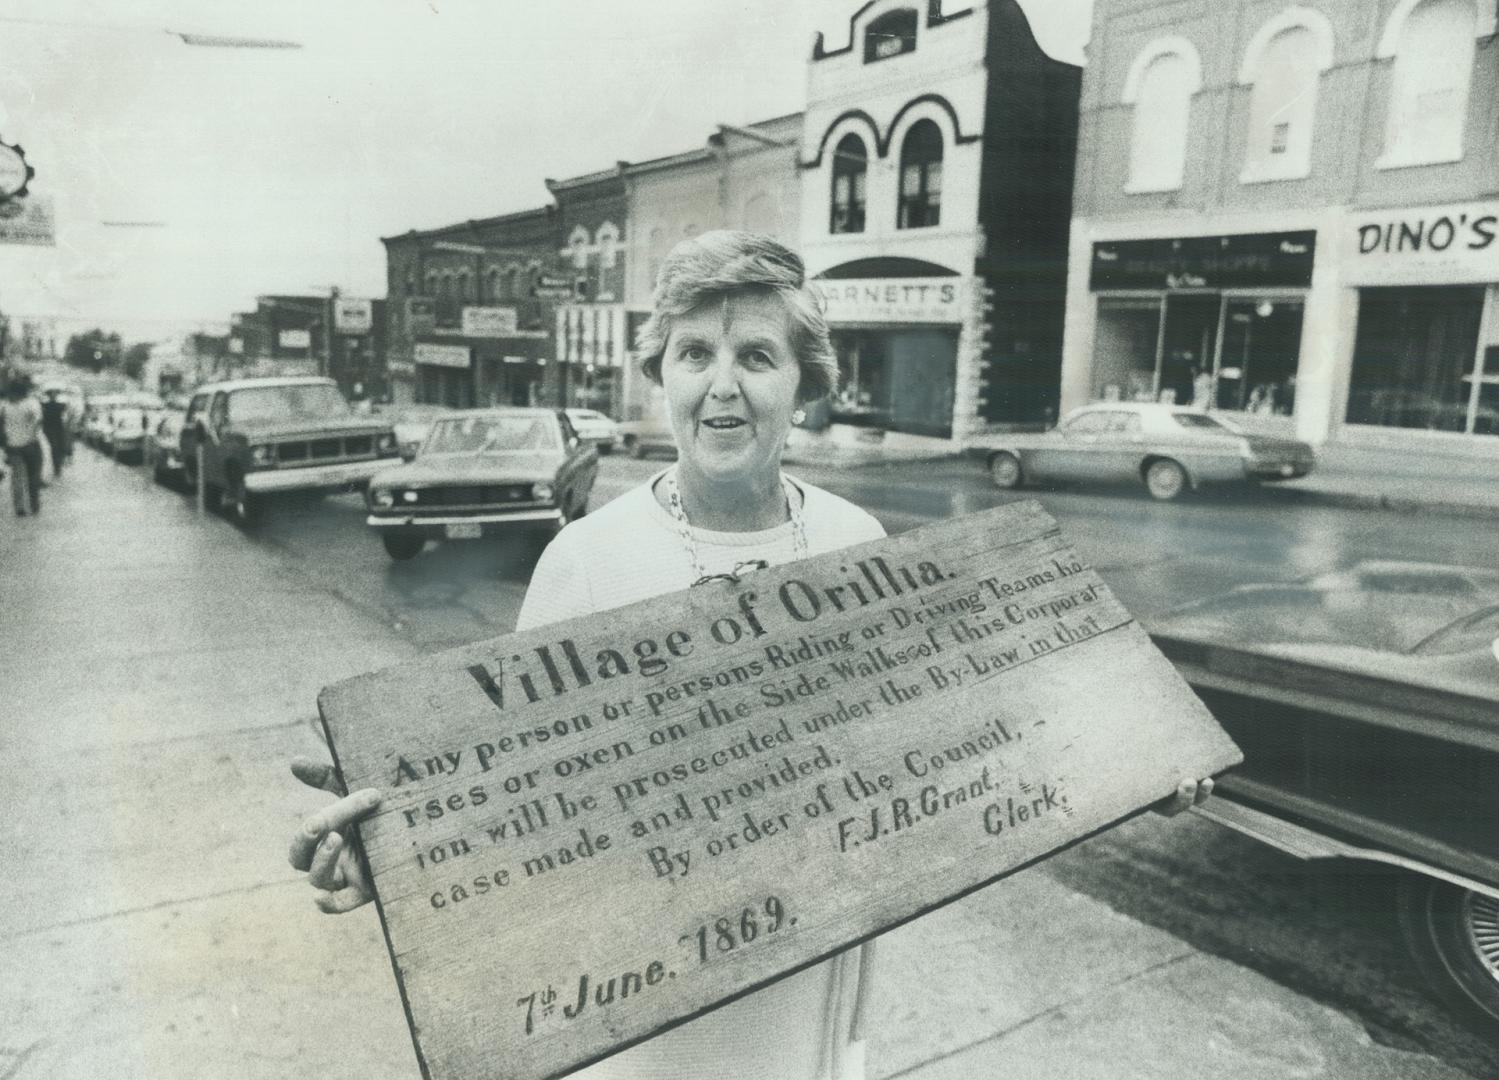 The past lives on in Orillia - and not just in the old sign that insurance agent Sue Mulcahy displays in the town's main street. The massive reserve t(...)